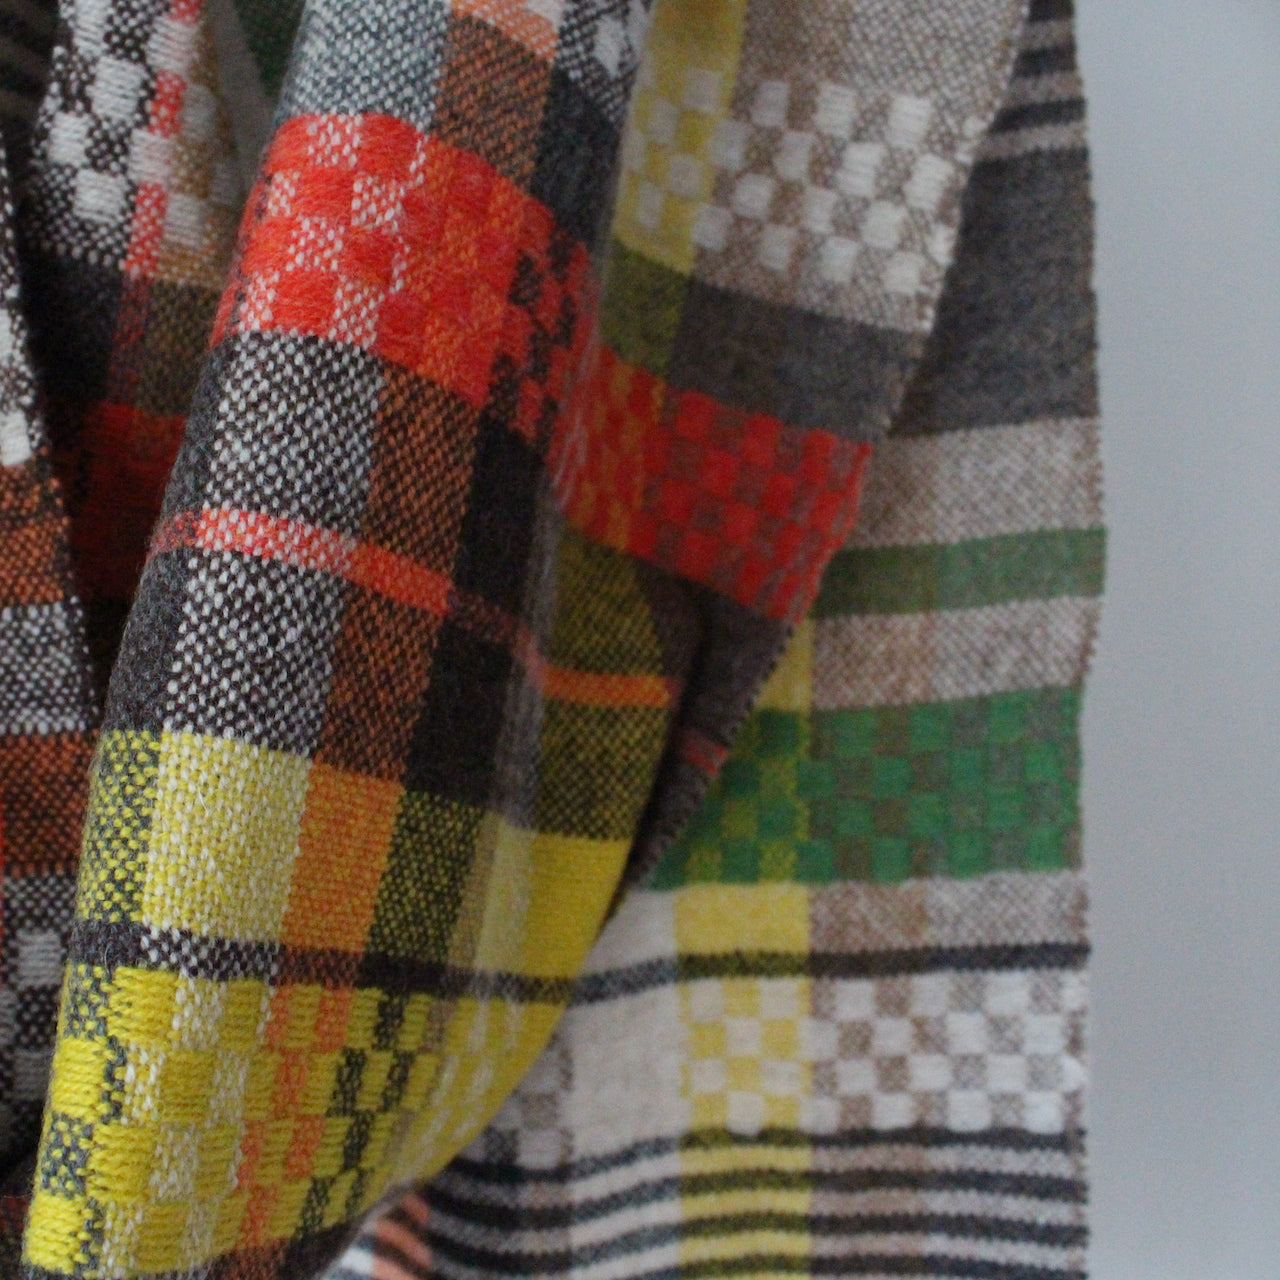 Close up of handwoven scarf in shades of yellow, green and red